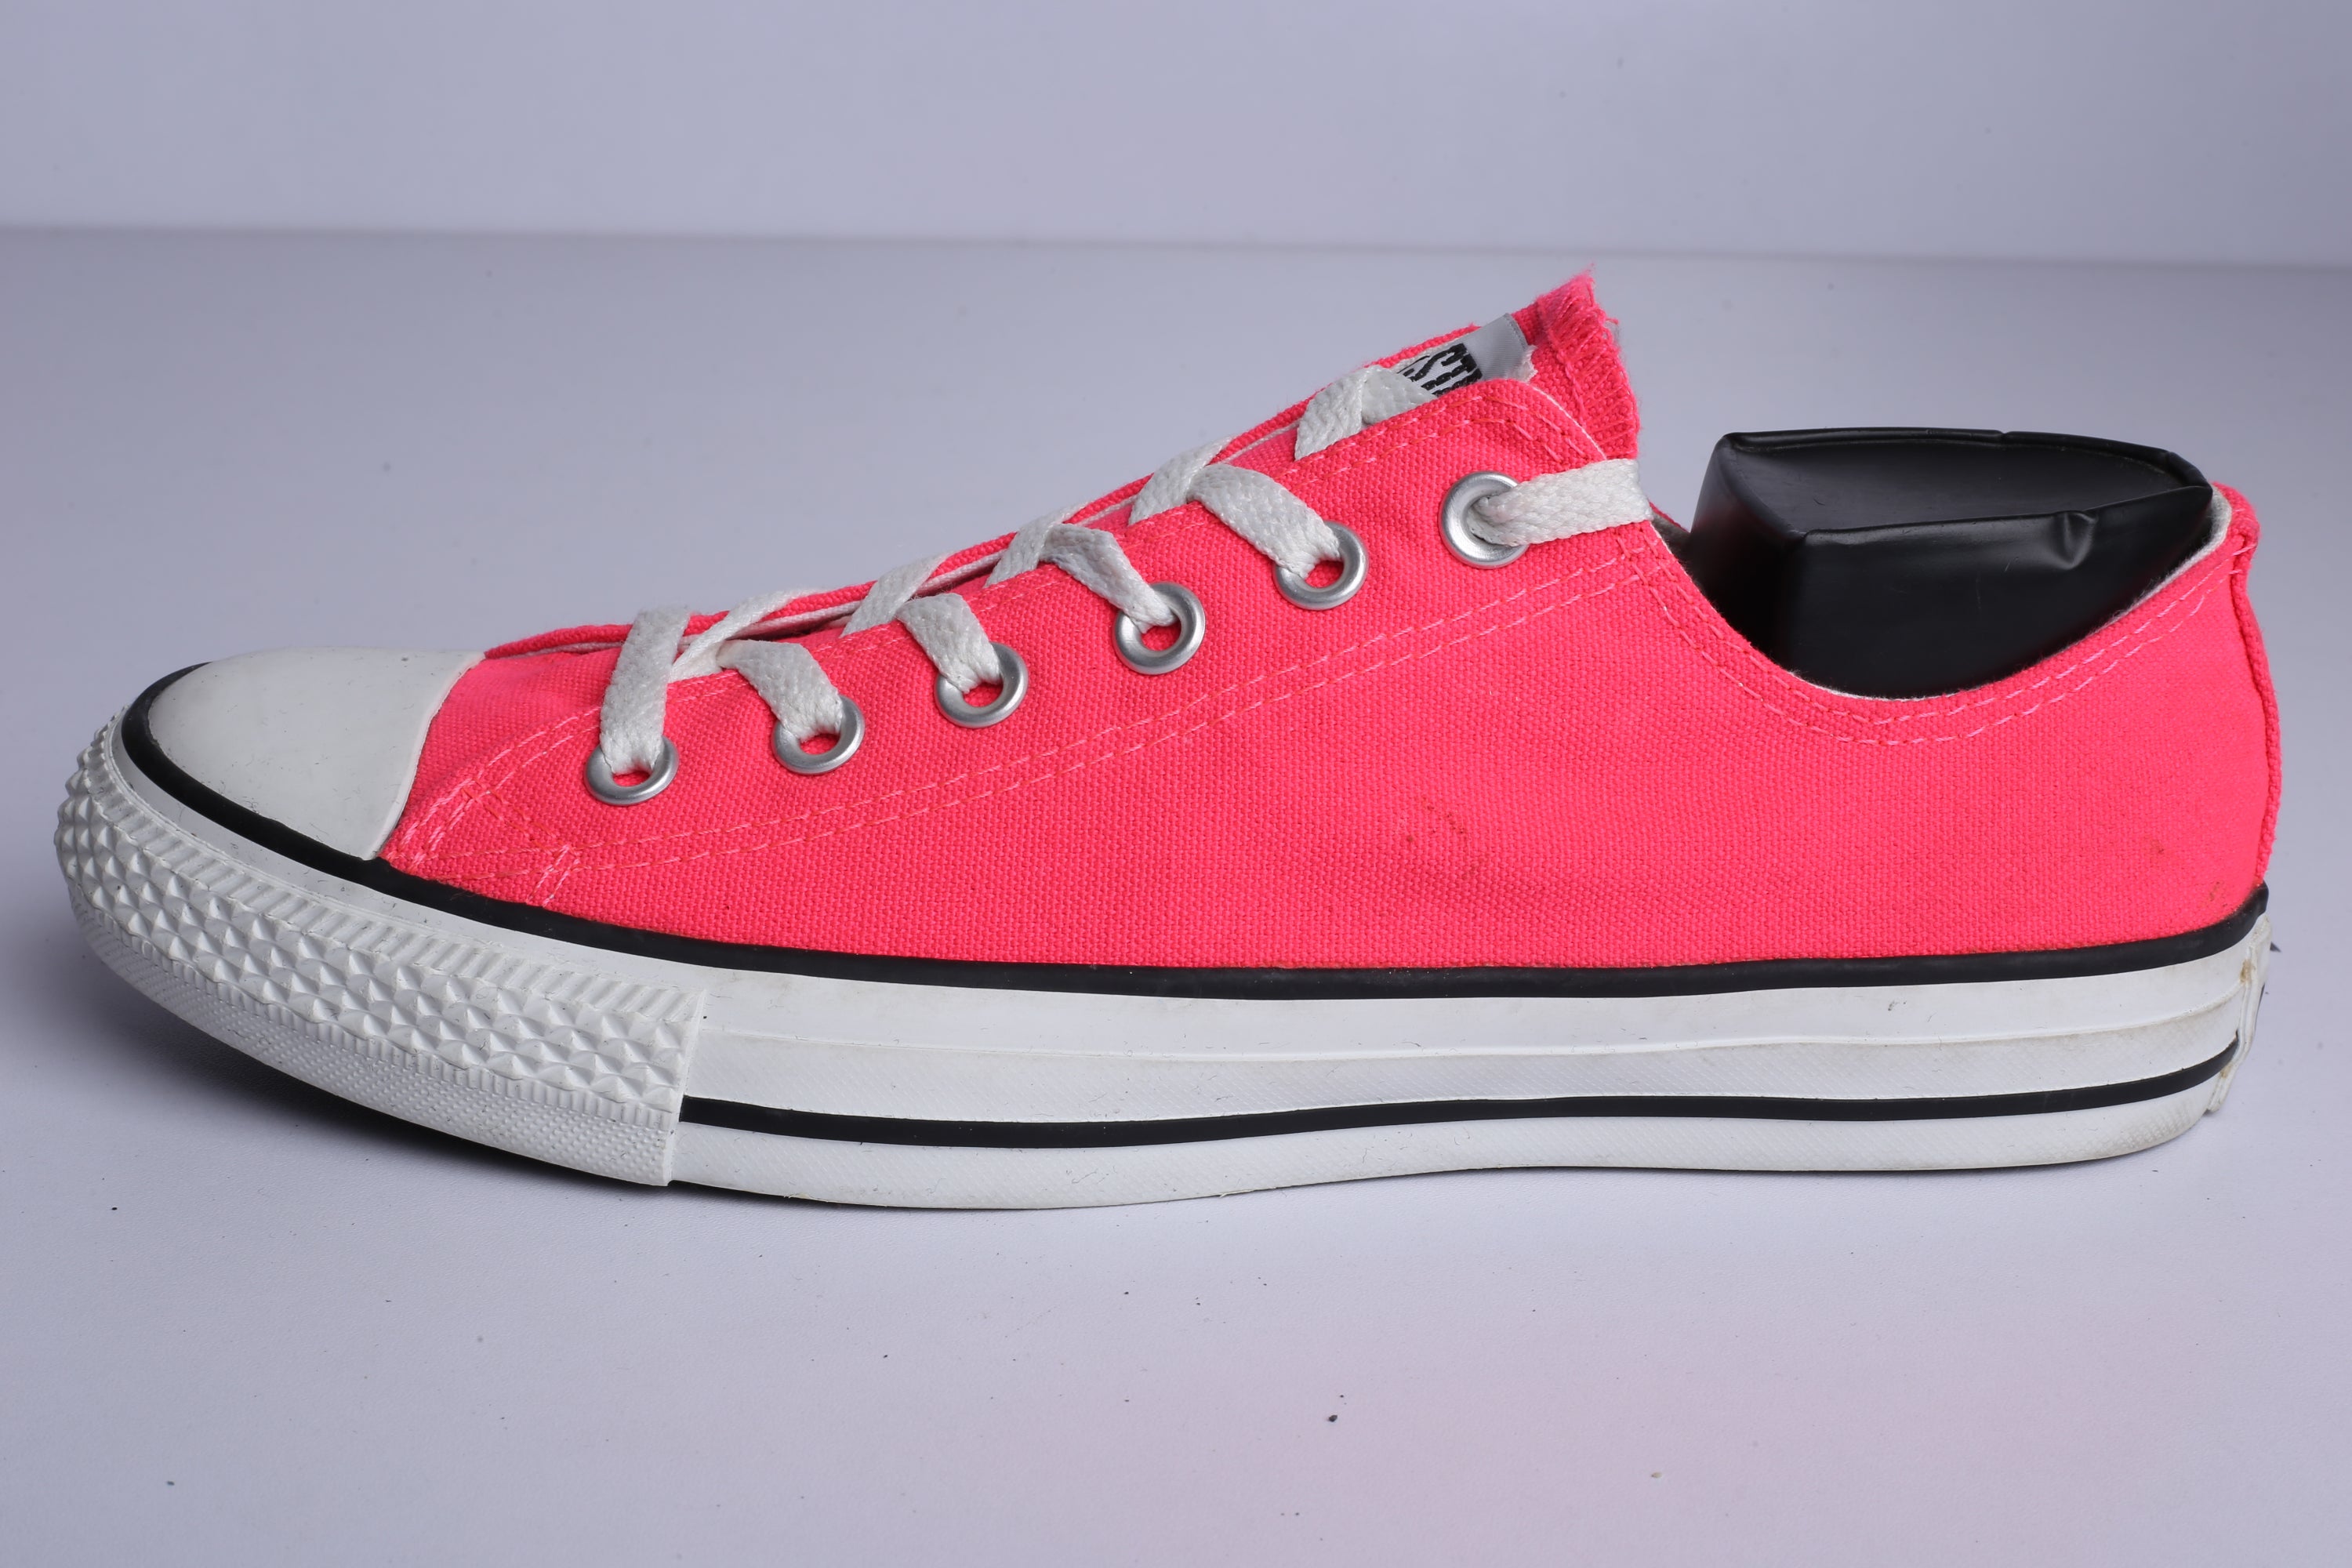 Chuck Taylor All Star Lows Pink Sneaker - (Condition Premium*)